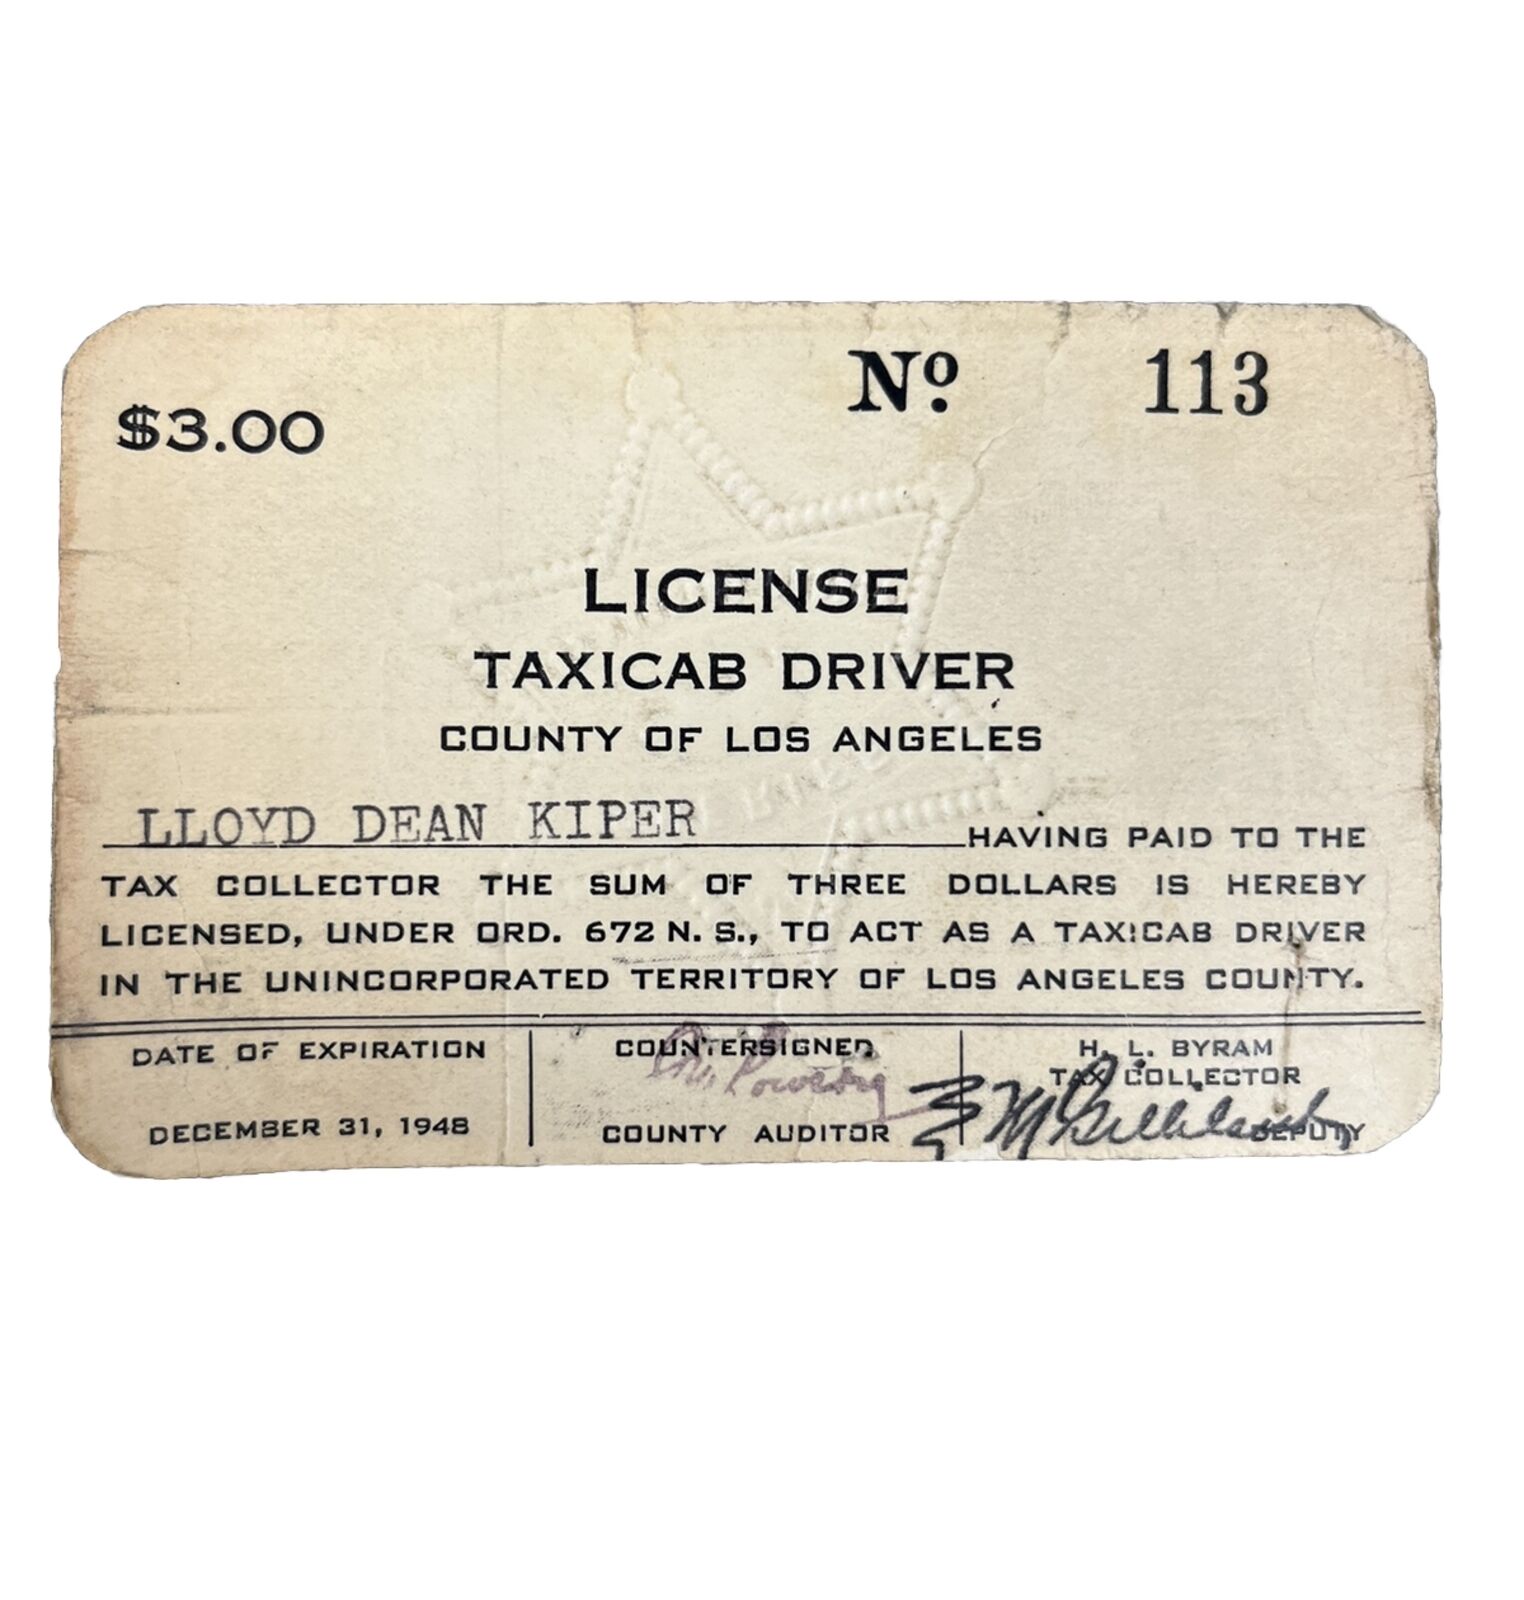 LOS ANGELES CHAUFFEUR TAXI CAB 1948 PROFESSIONAL DRIVERS LICENSE VINTAGE